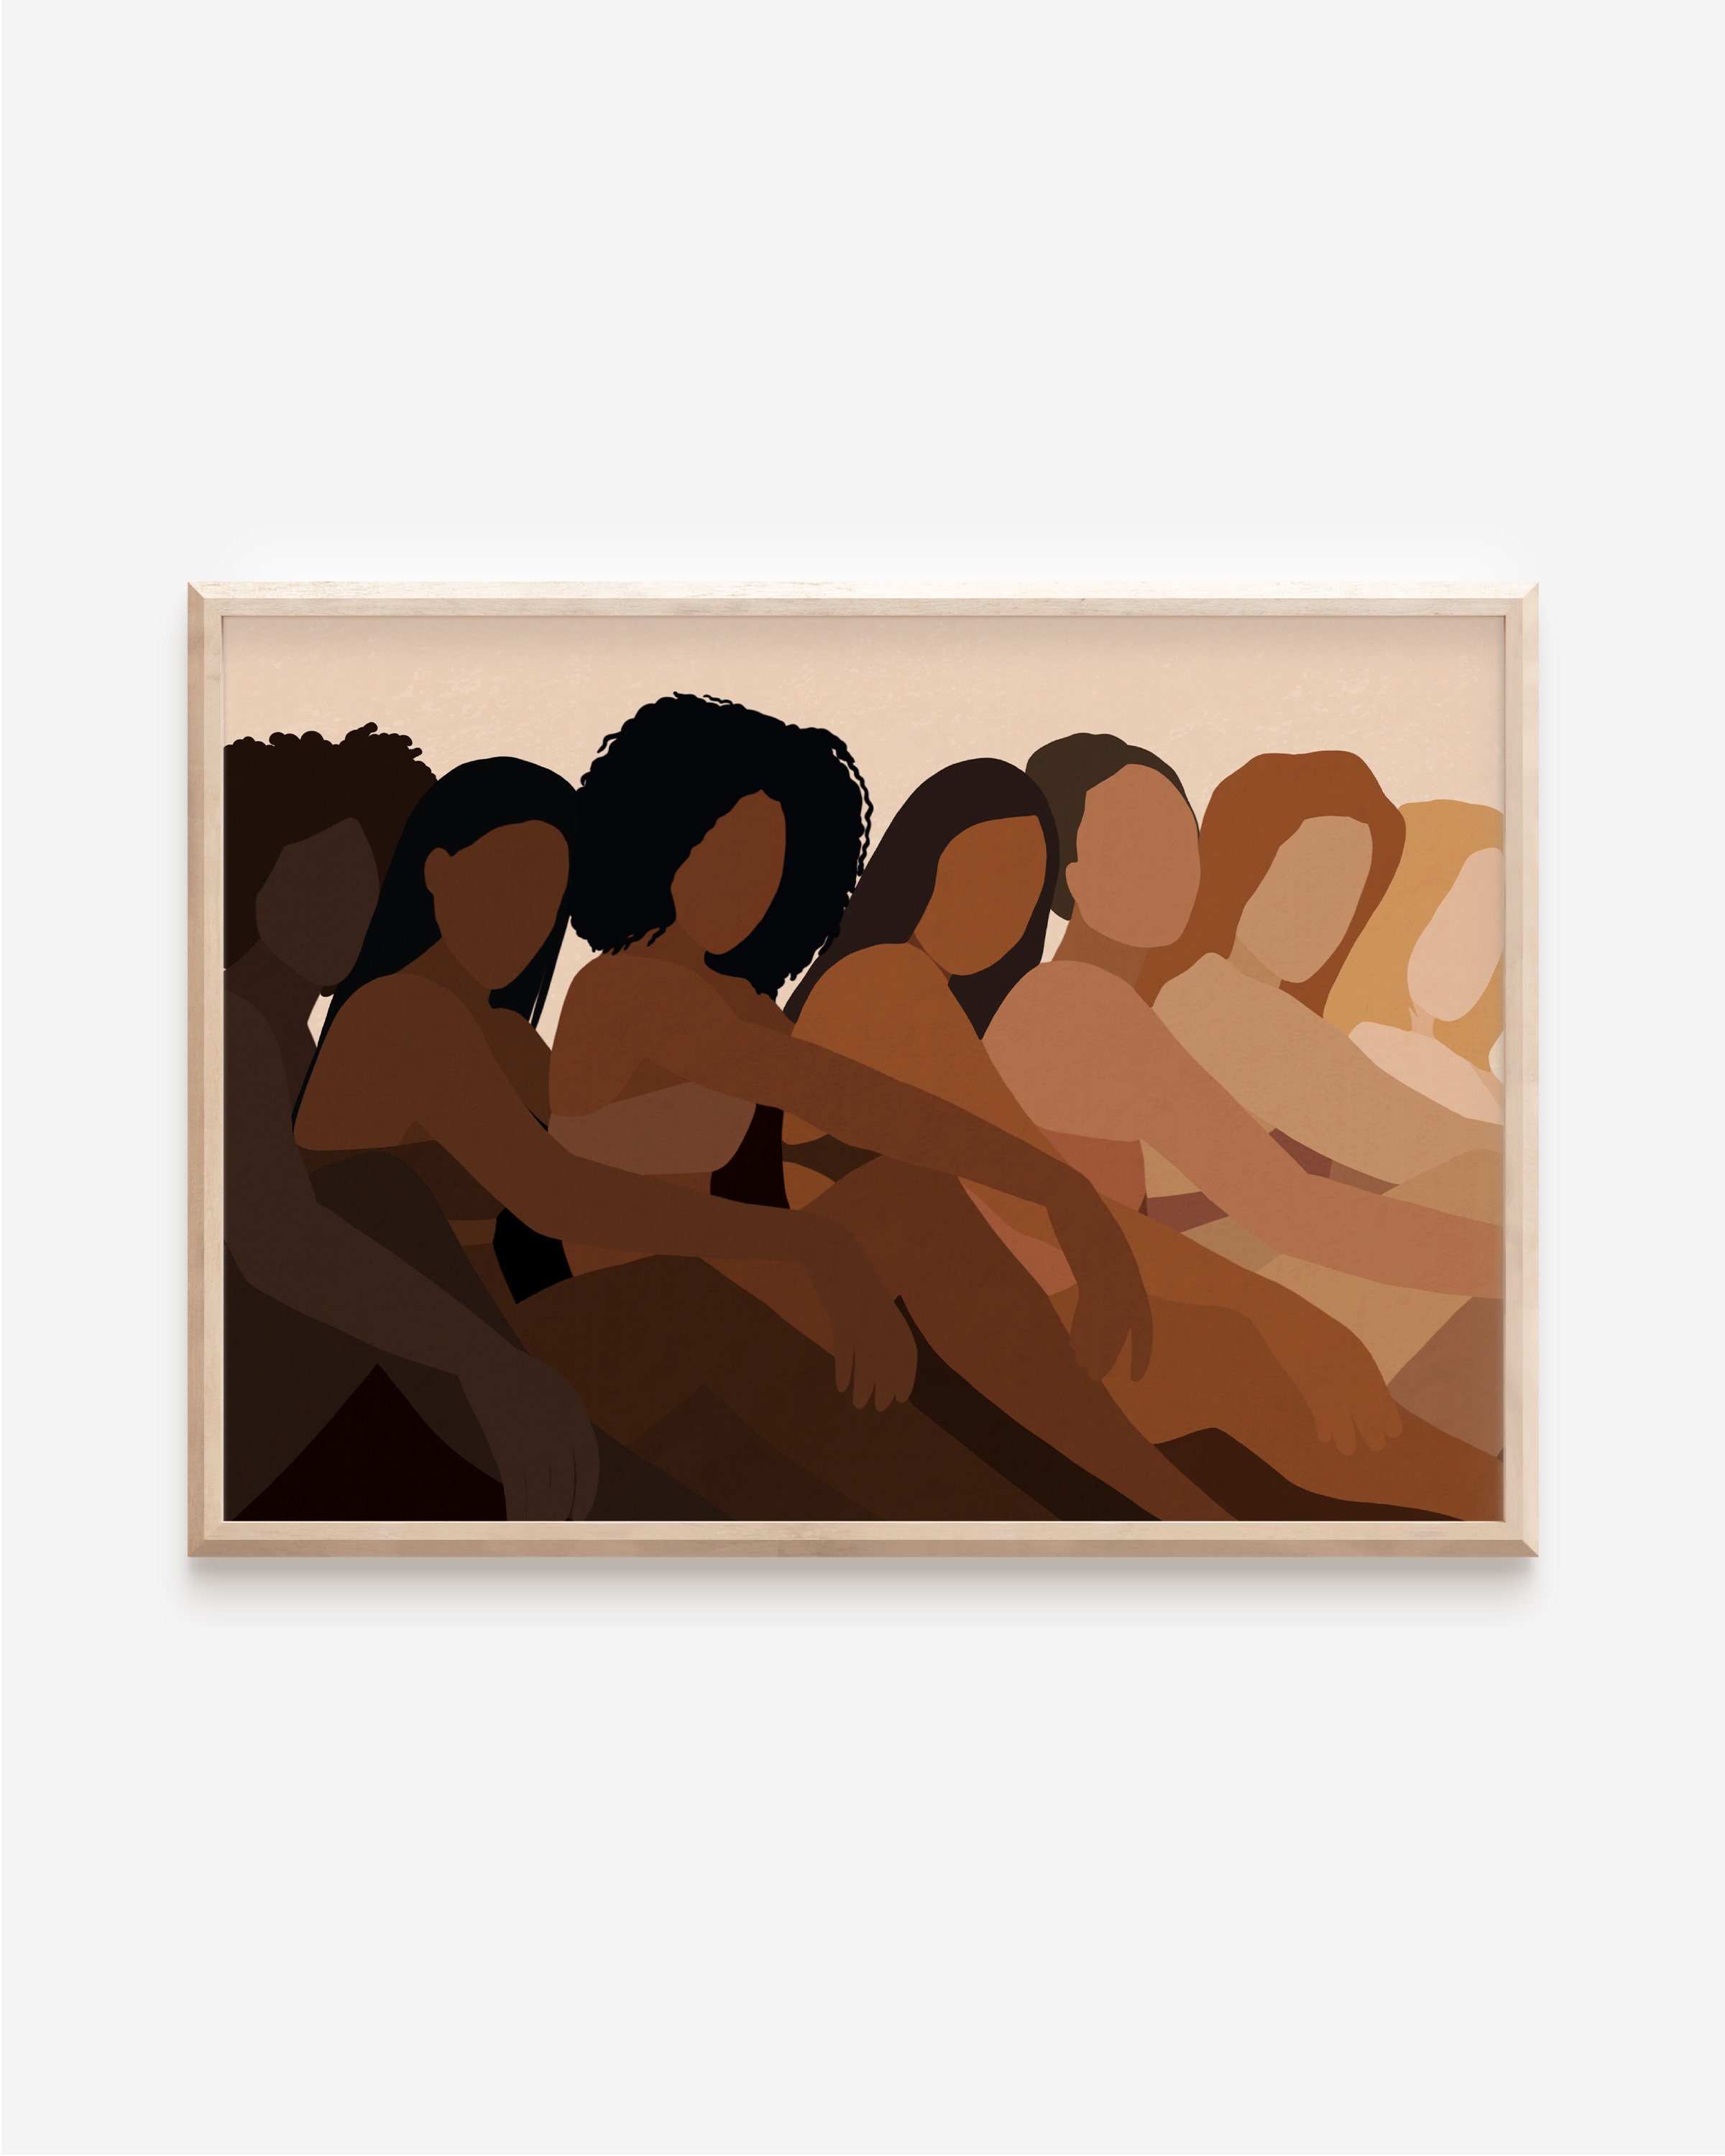 Nudes in All Colors Diverse Artwork African American Art Black